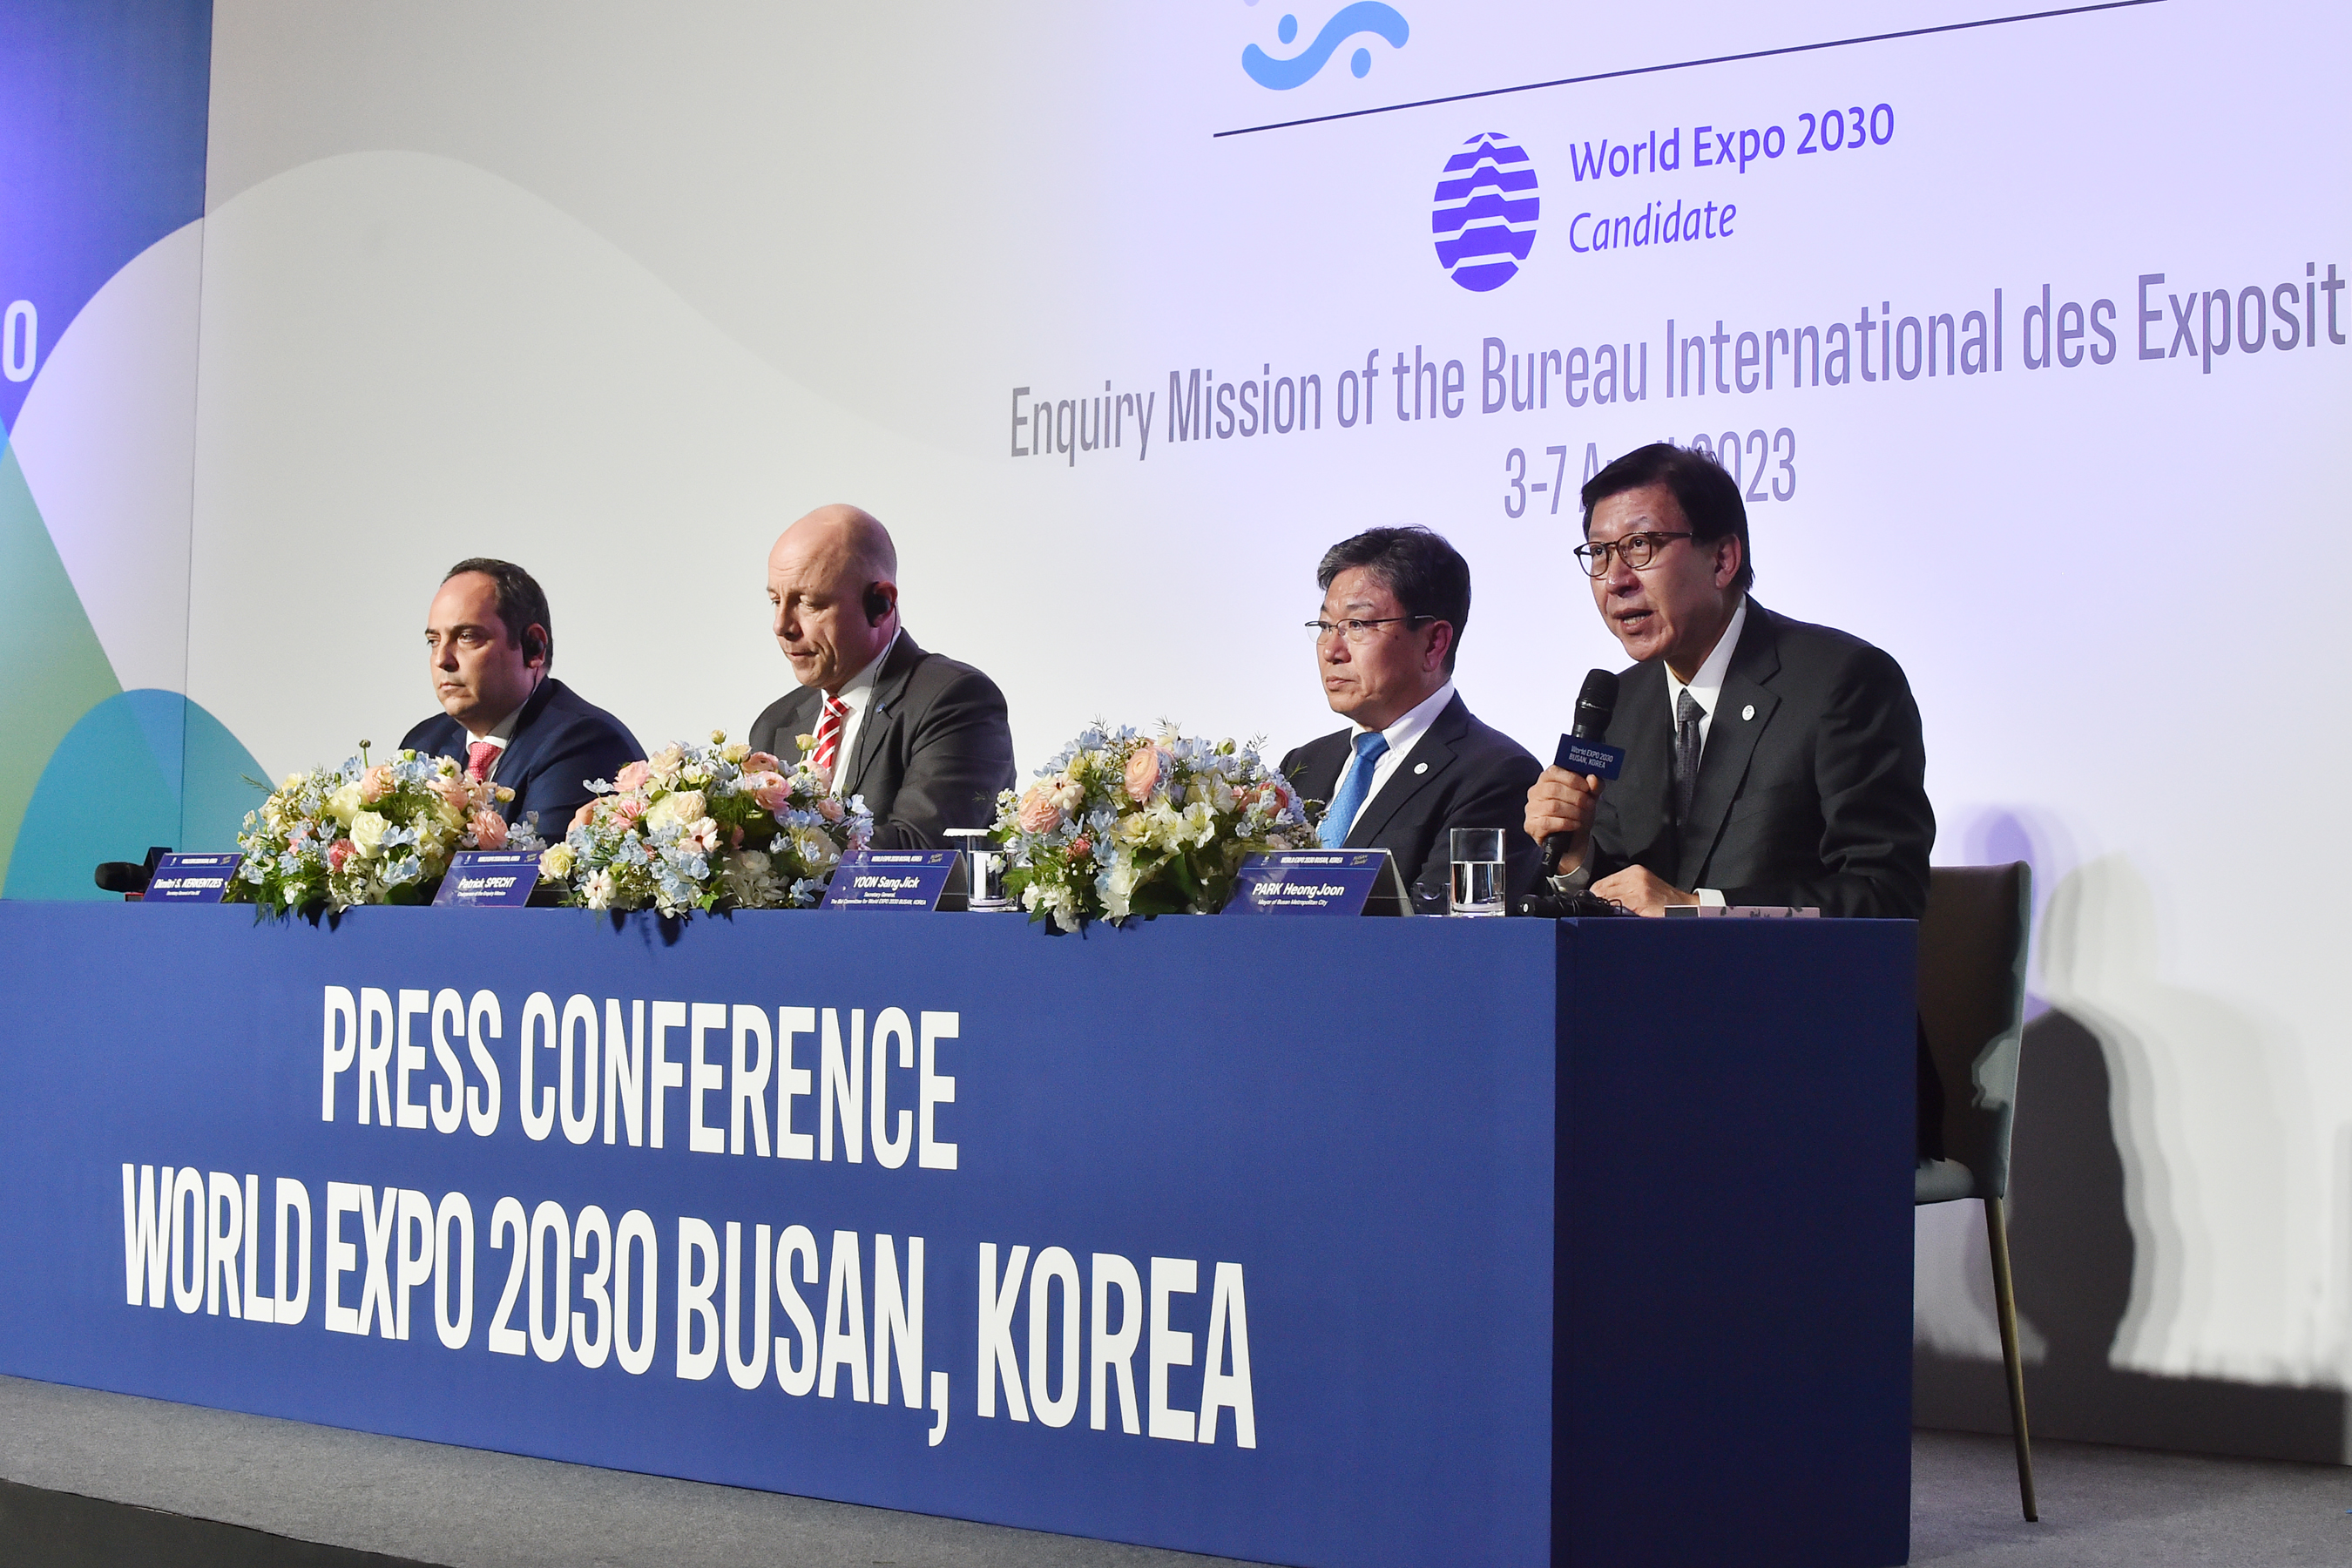 [Busan is Ready!] BIE: ‘Busan has everything it takes to host the World Expo’